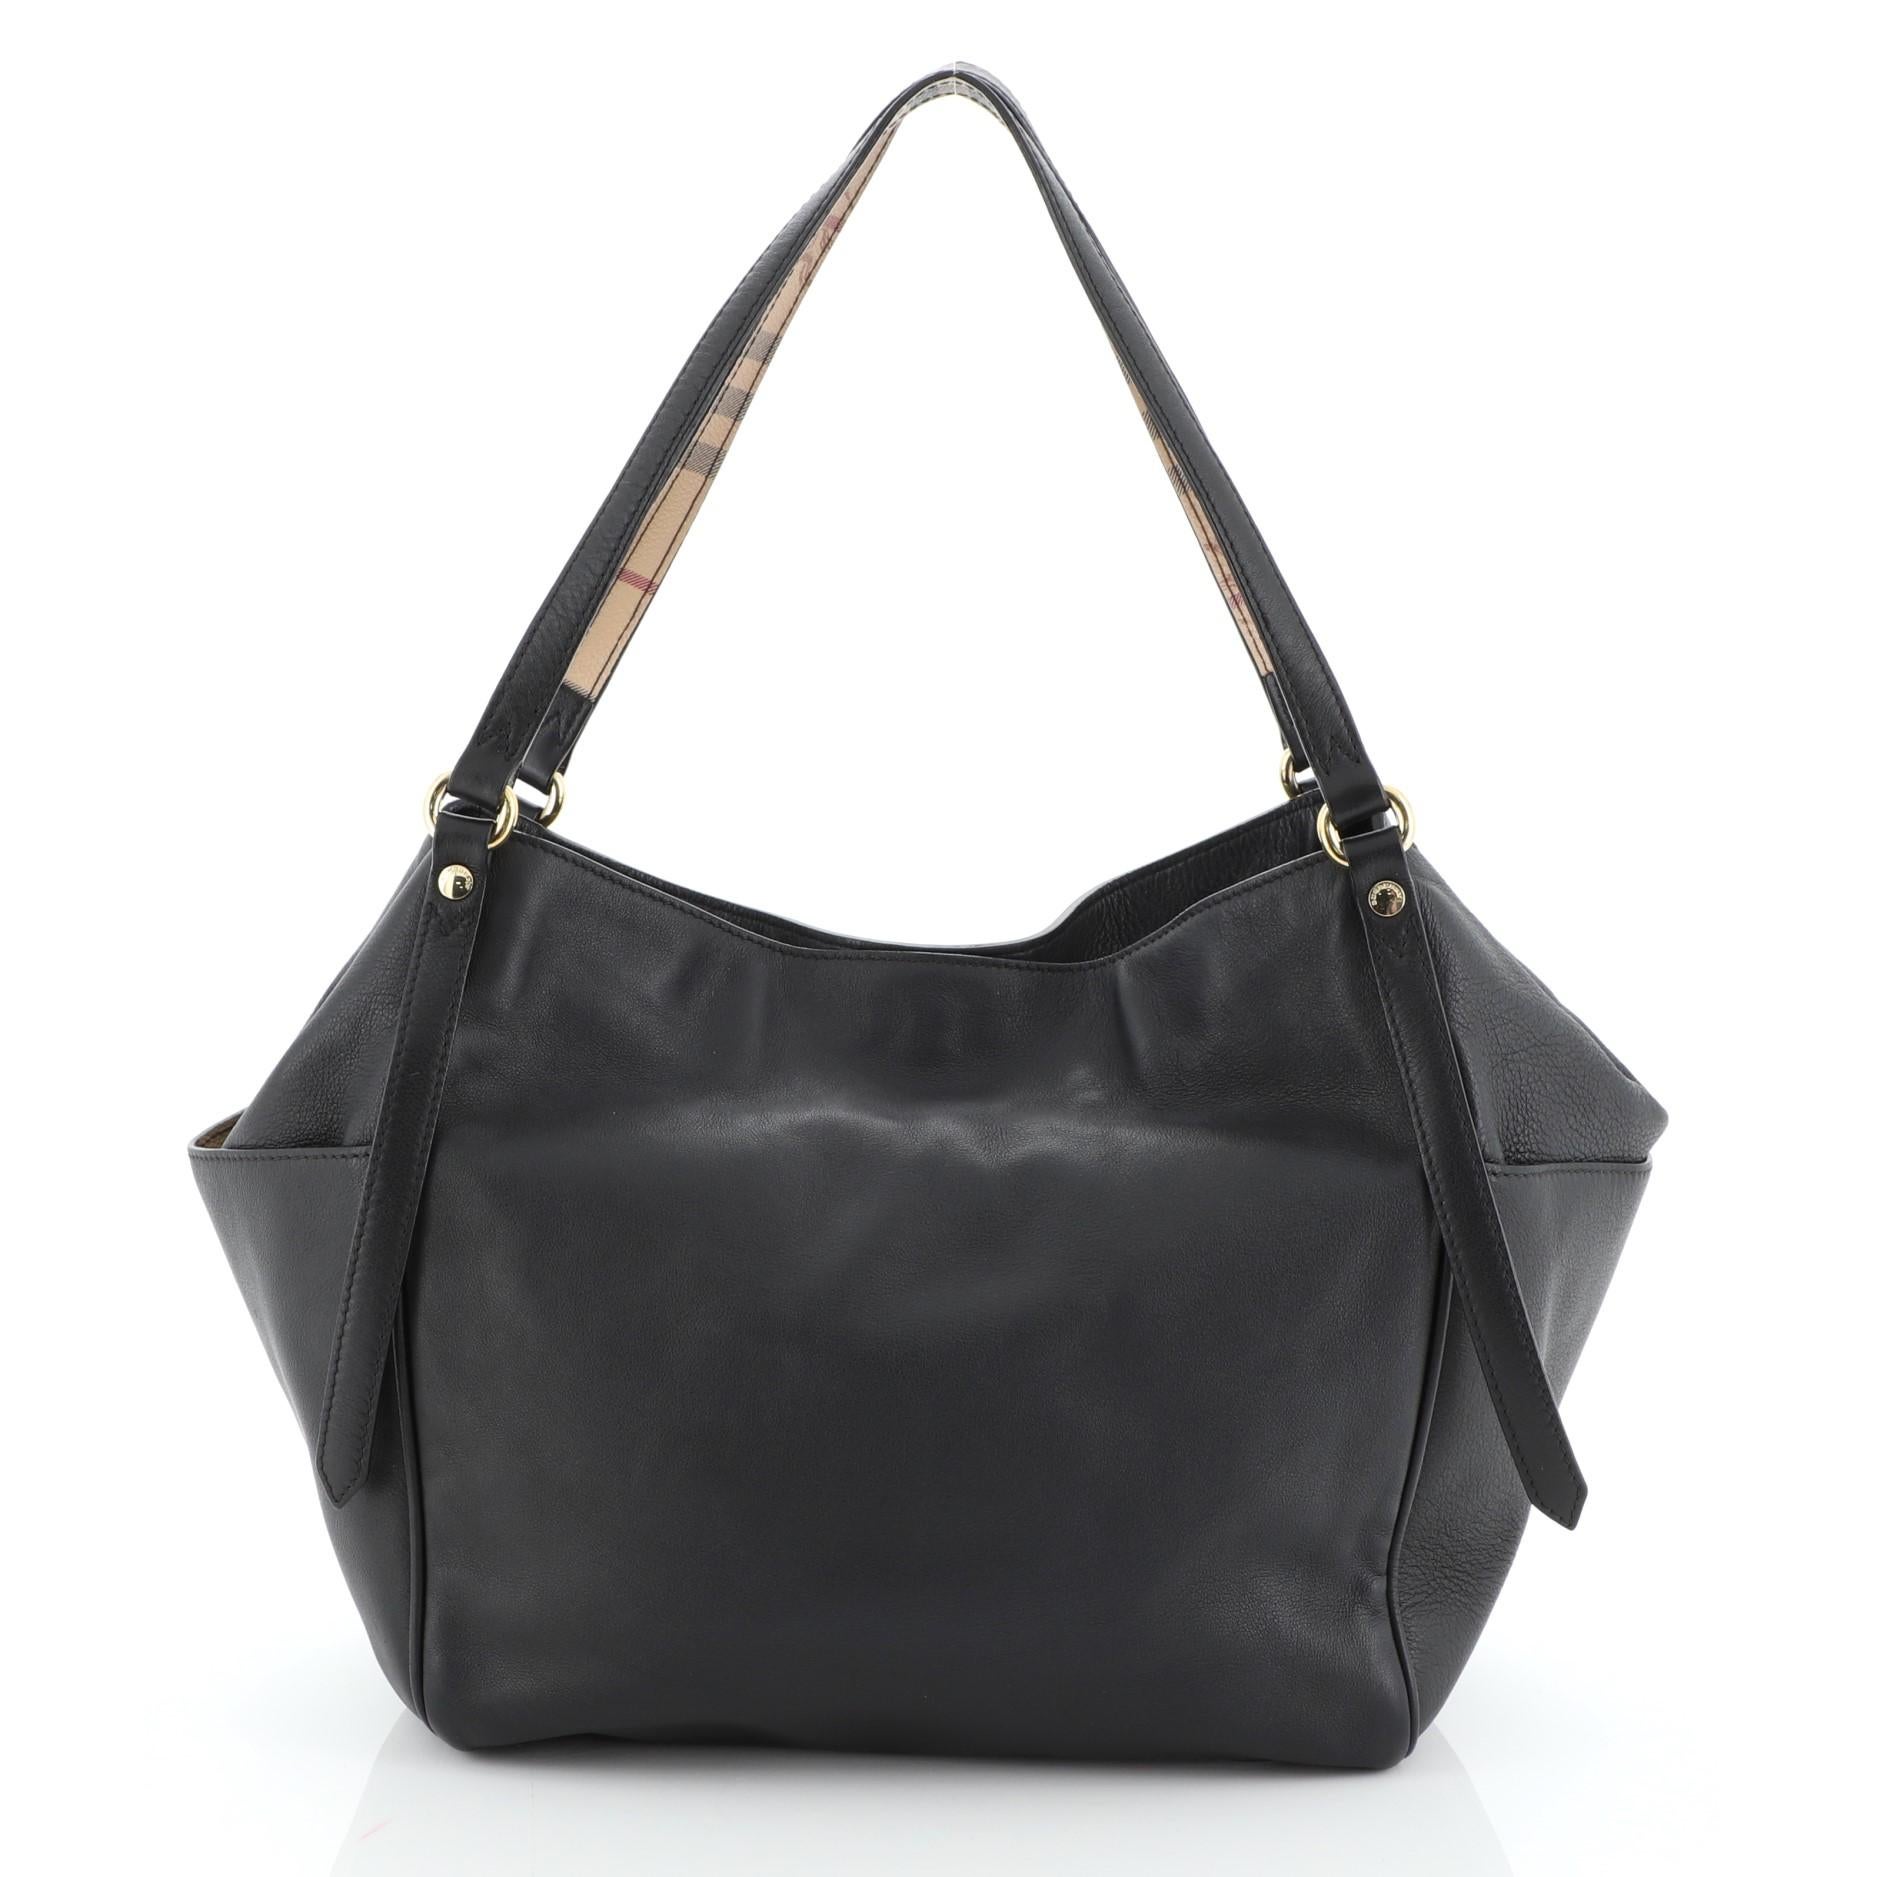 burberry canterbury leather tote